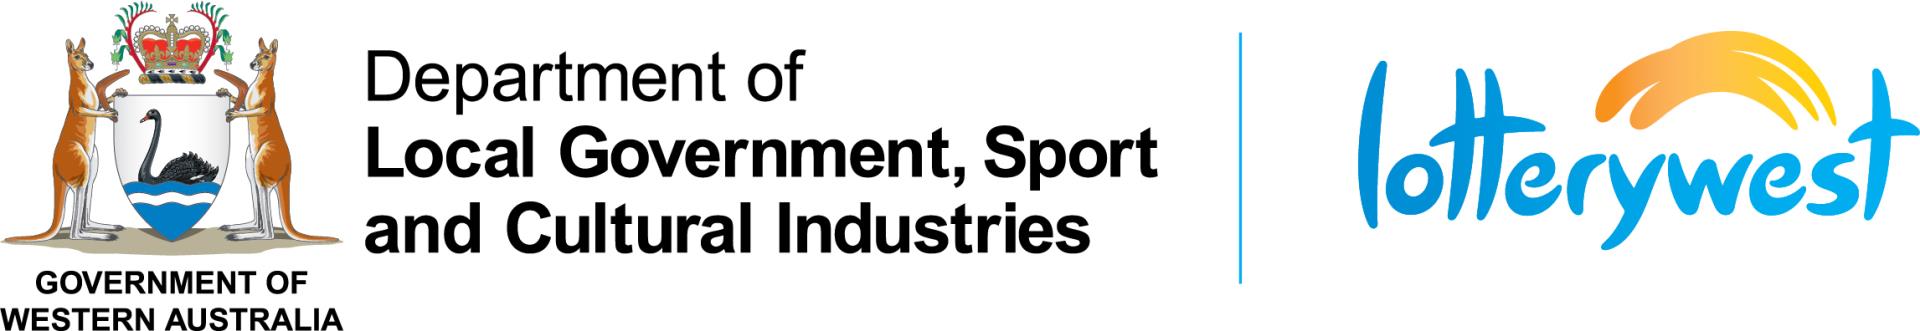 Department of Local Government, Sport and Cultural Industries and Lotterywest Logo